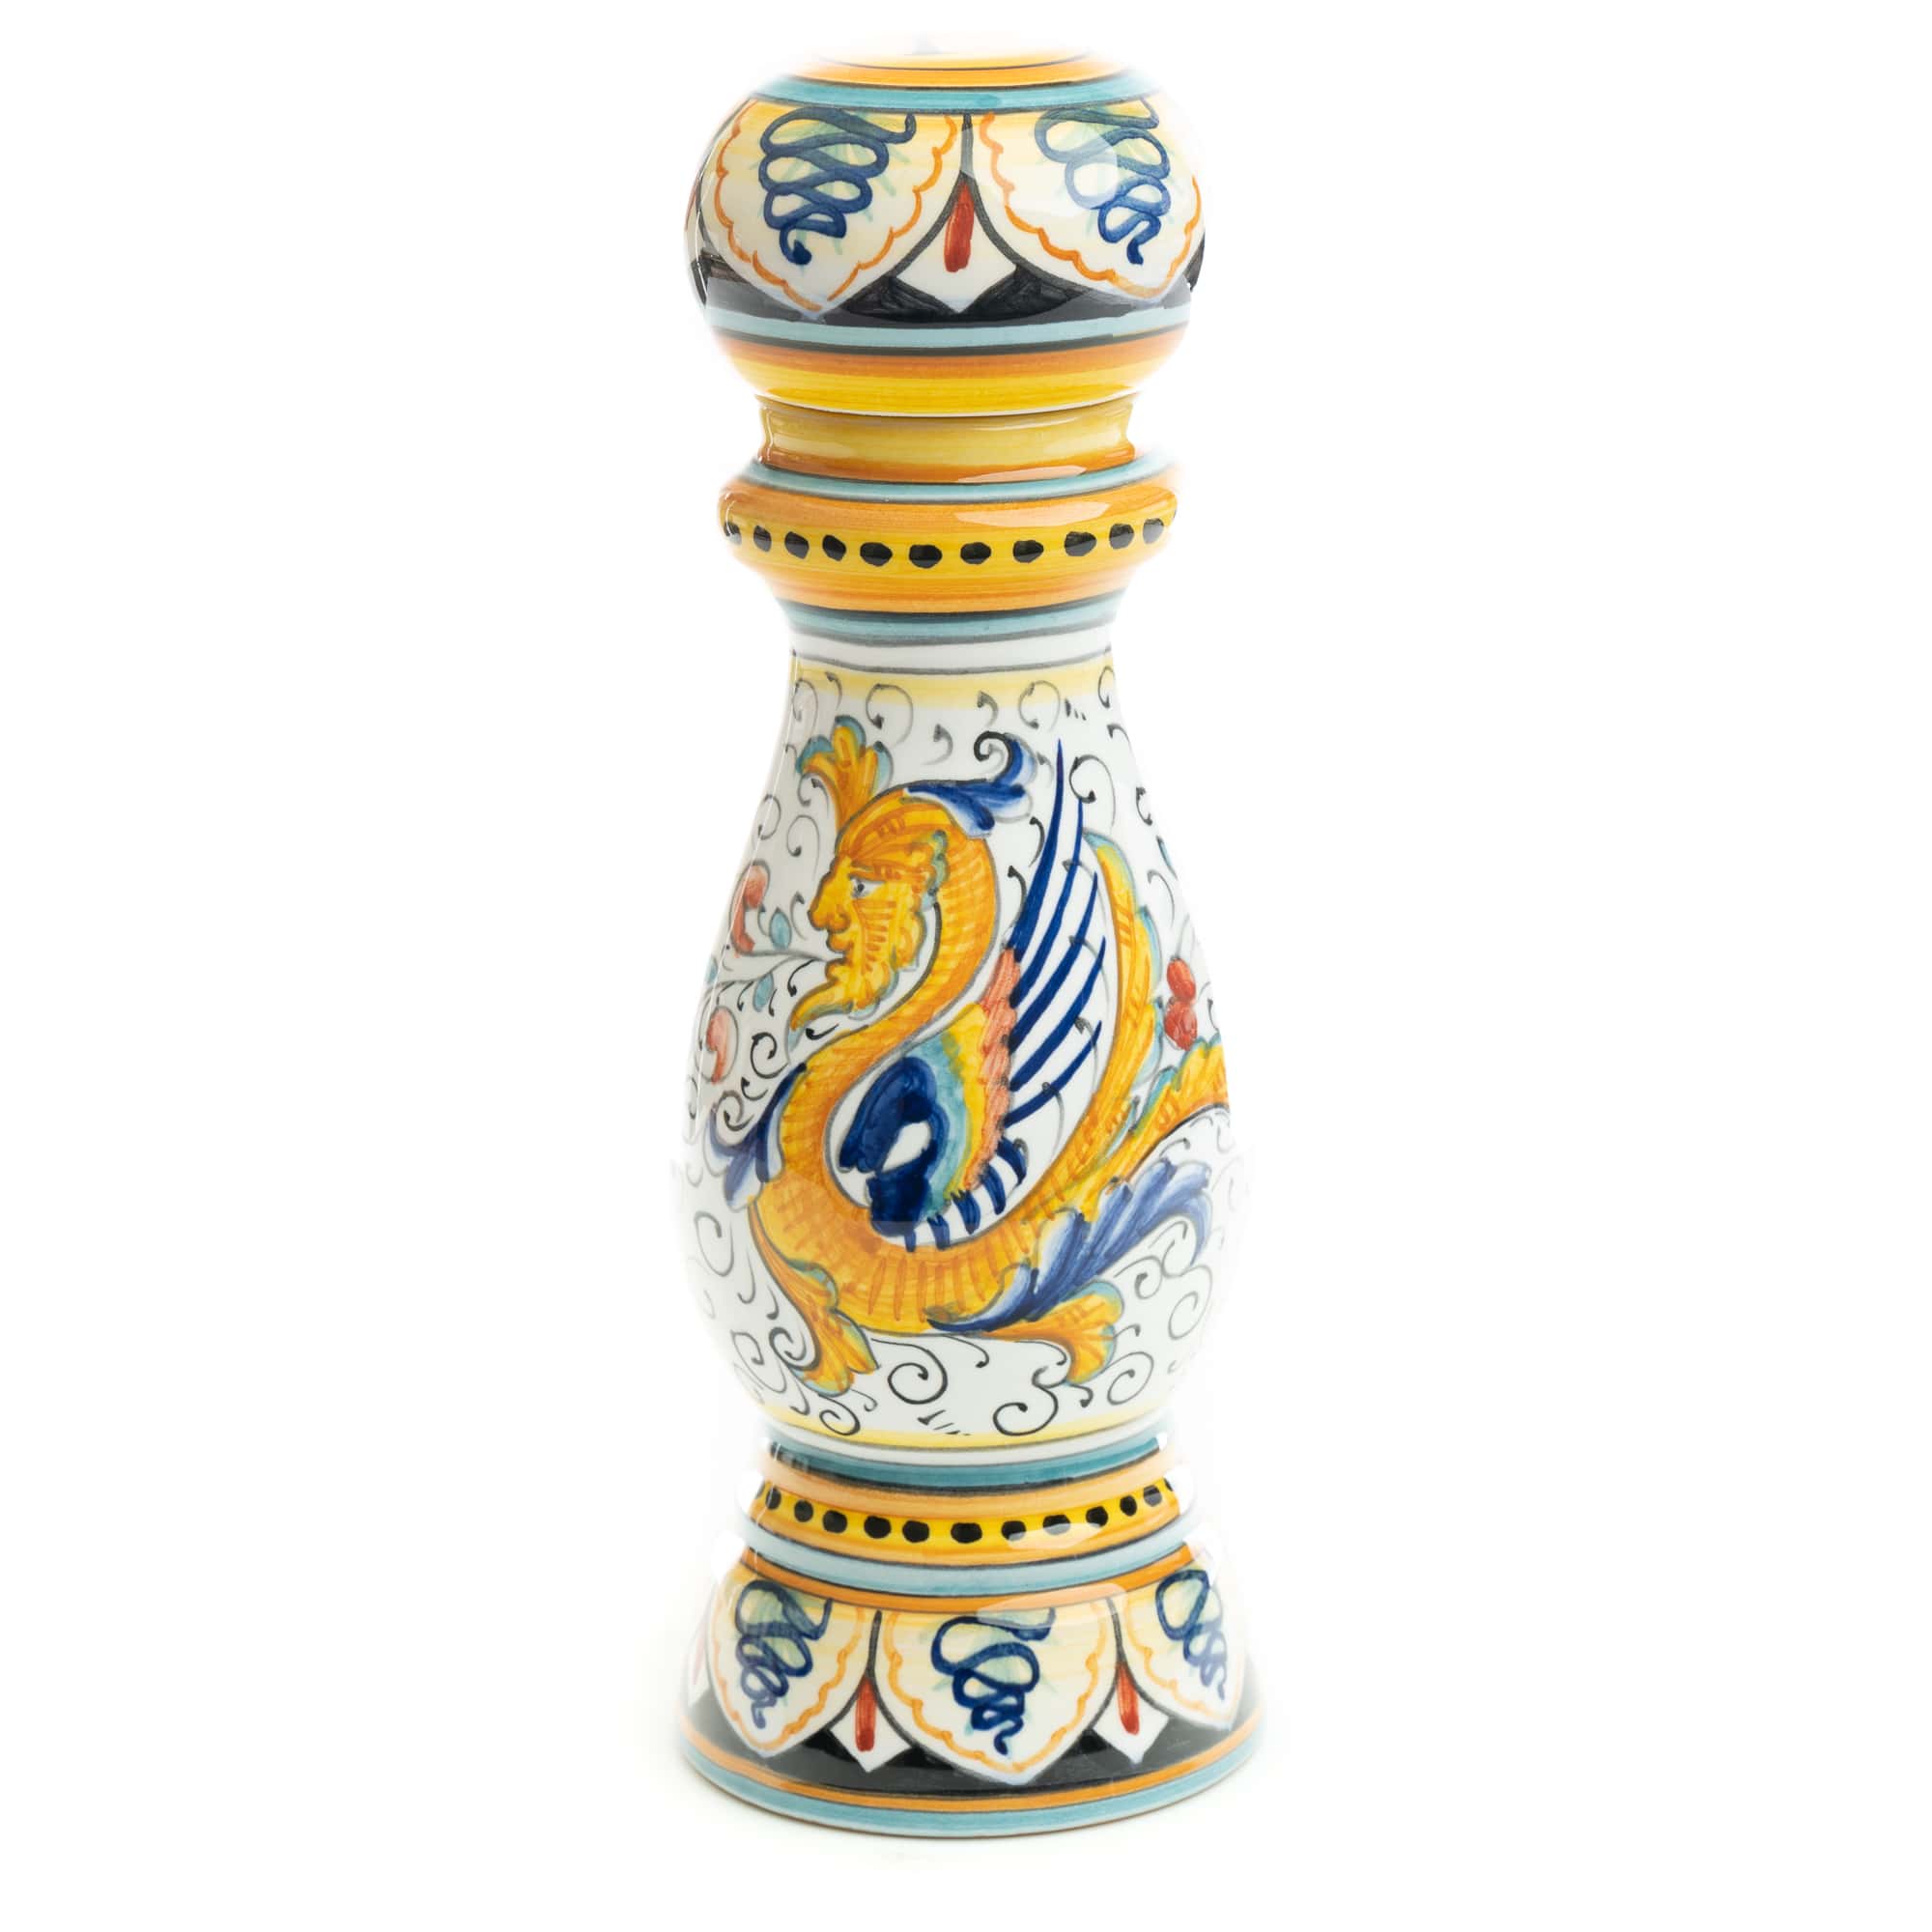 Raffaellesco - Pepper Grinder, ceramics, pottery, italian design, majolica, handmade, handcrafted, handpainted, home decor, kitchen art, home goods, deruta, majolica, Artisan, treasures, traditional art, modern art, gift ideas, style, SF, shop small business, artists, shop online, landmark store, legacy, one of a kind, limited edition, gift guide, gift shop, retail shop, decorations, shopping, italy, home staging, home decorating, home interiors